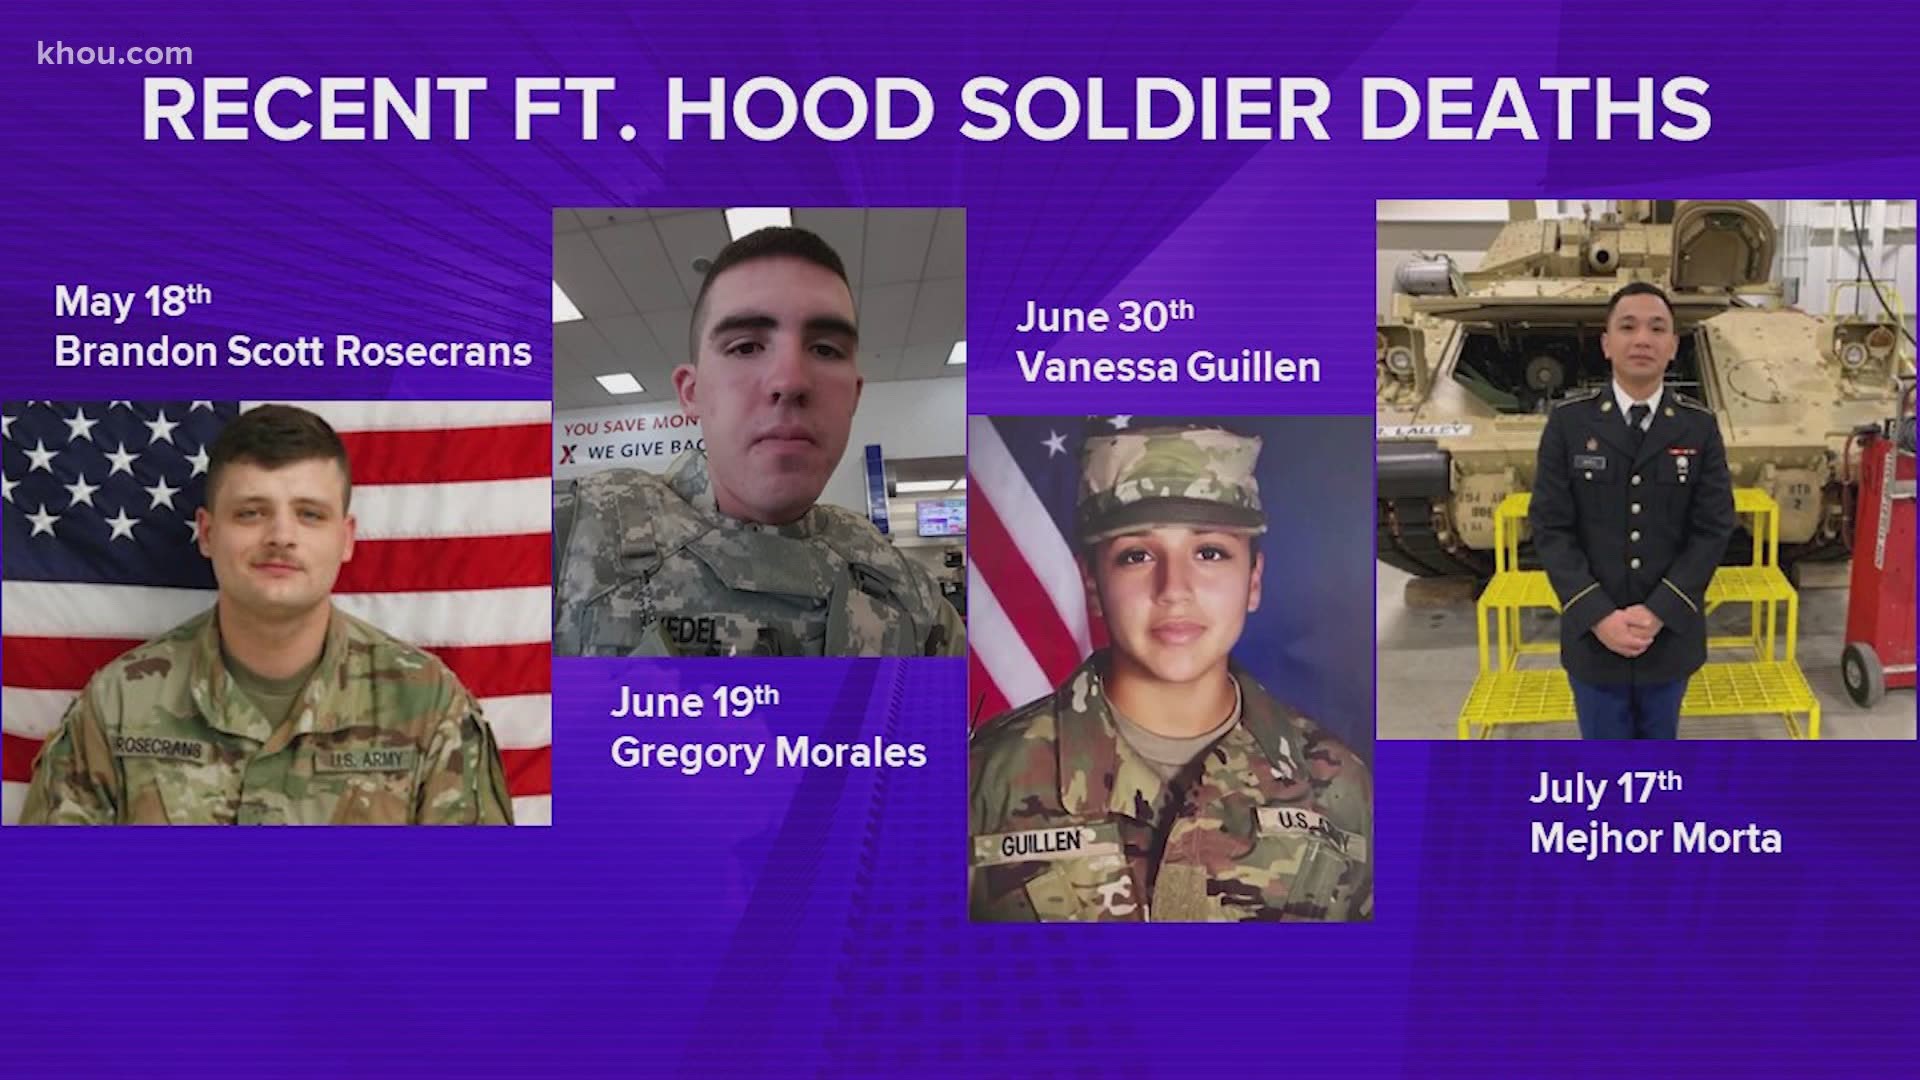 Four Fort Hood soldiers were found dead all within the last few months. Calls to investigate the Army are growing louder, and some even want to see it shut down.